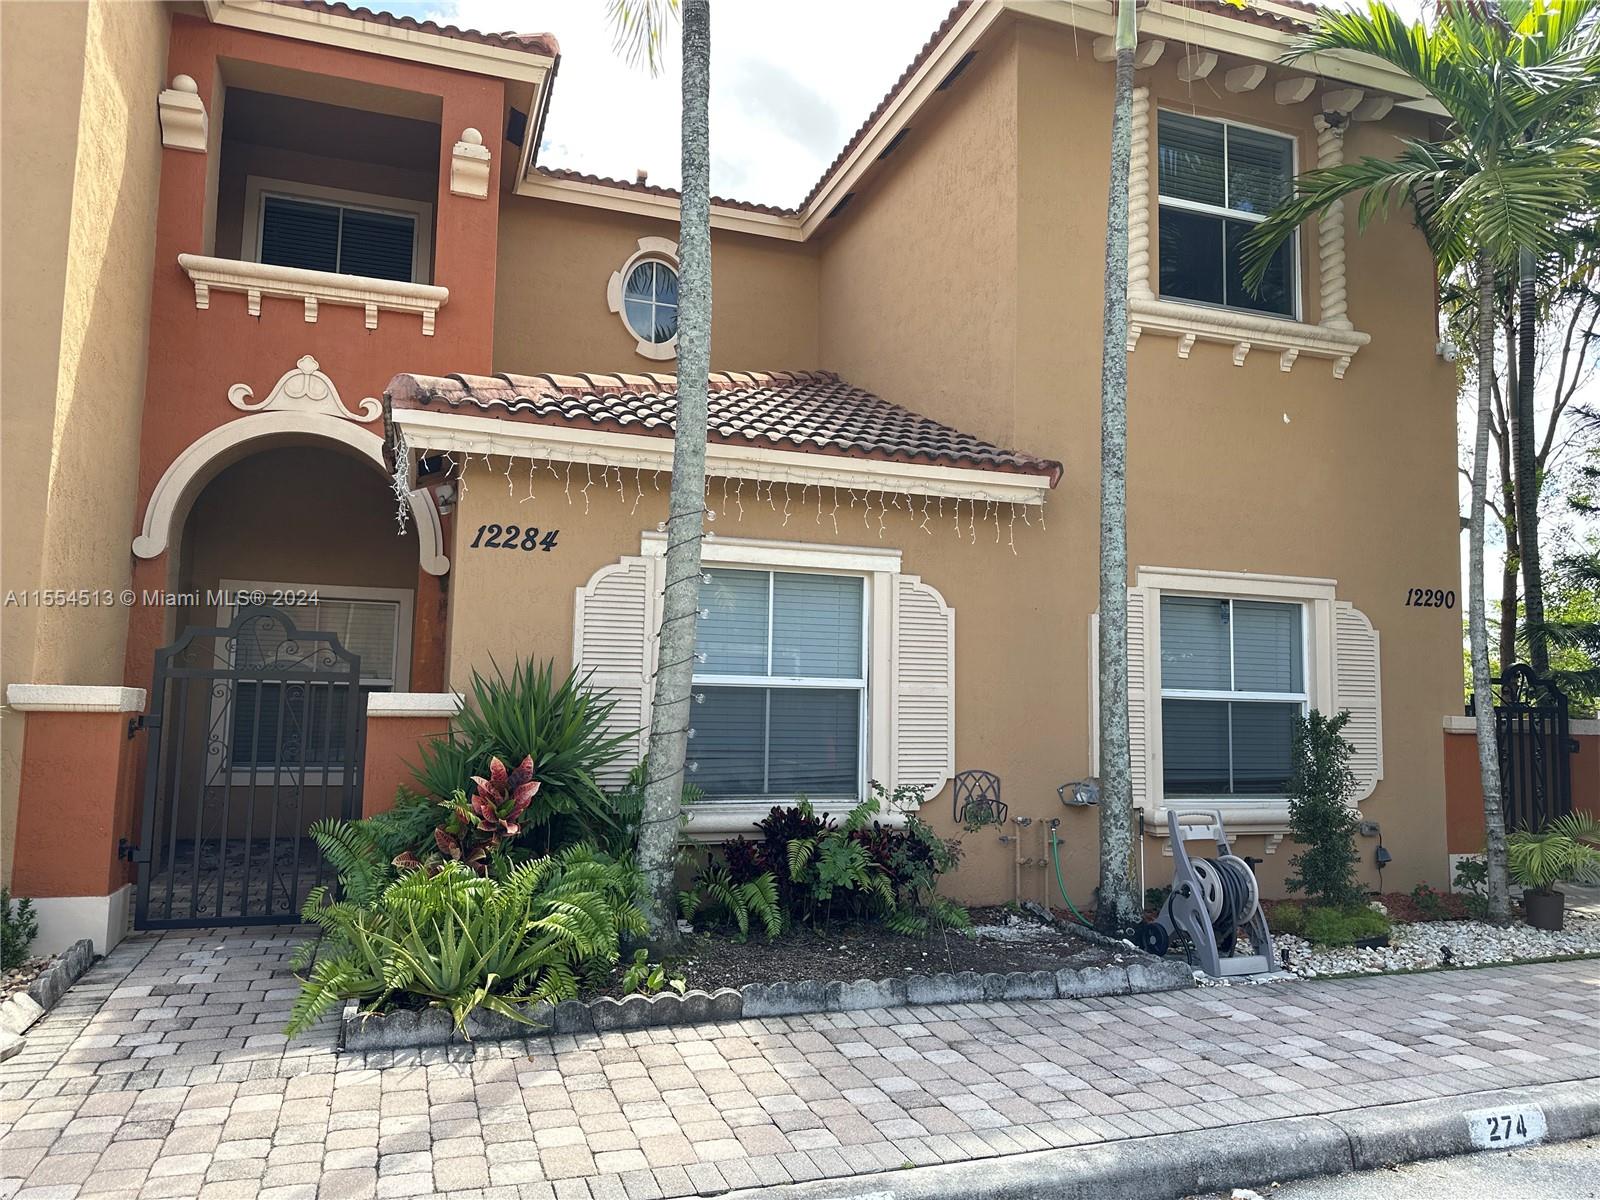 12284 SW 27th St 1307, Miramar, Florida 33025, 2 Bedrooms Bedrooms, ,2 BathroomsBathrooms,Residentiallease,For Rent,12284 SW 27th St 1307,A11554513